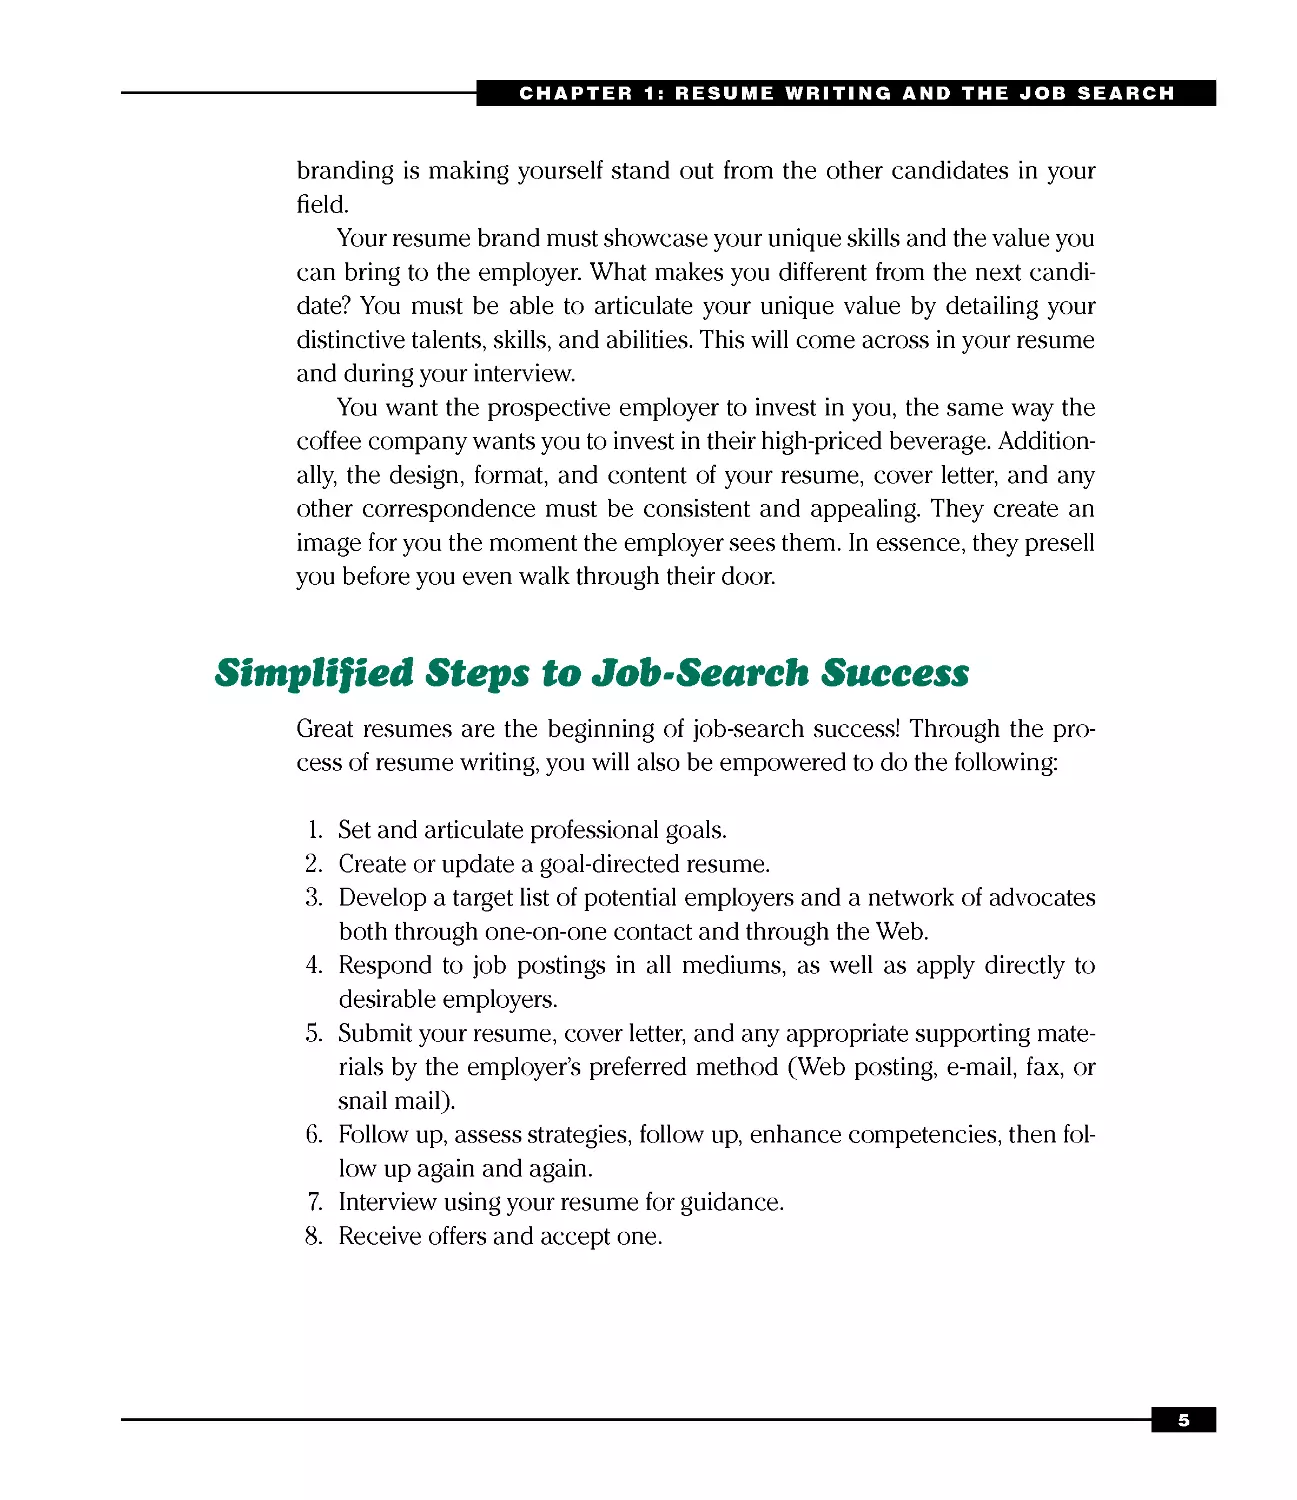 Simplified Steps to Job-Search Success